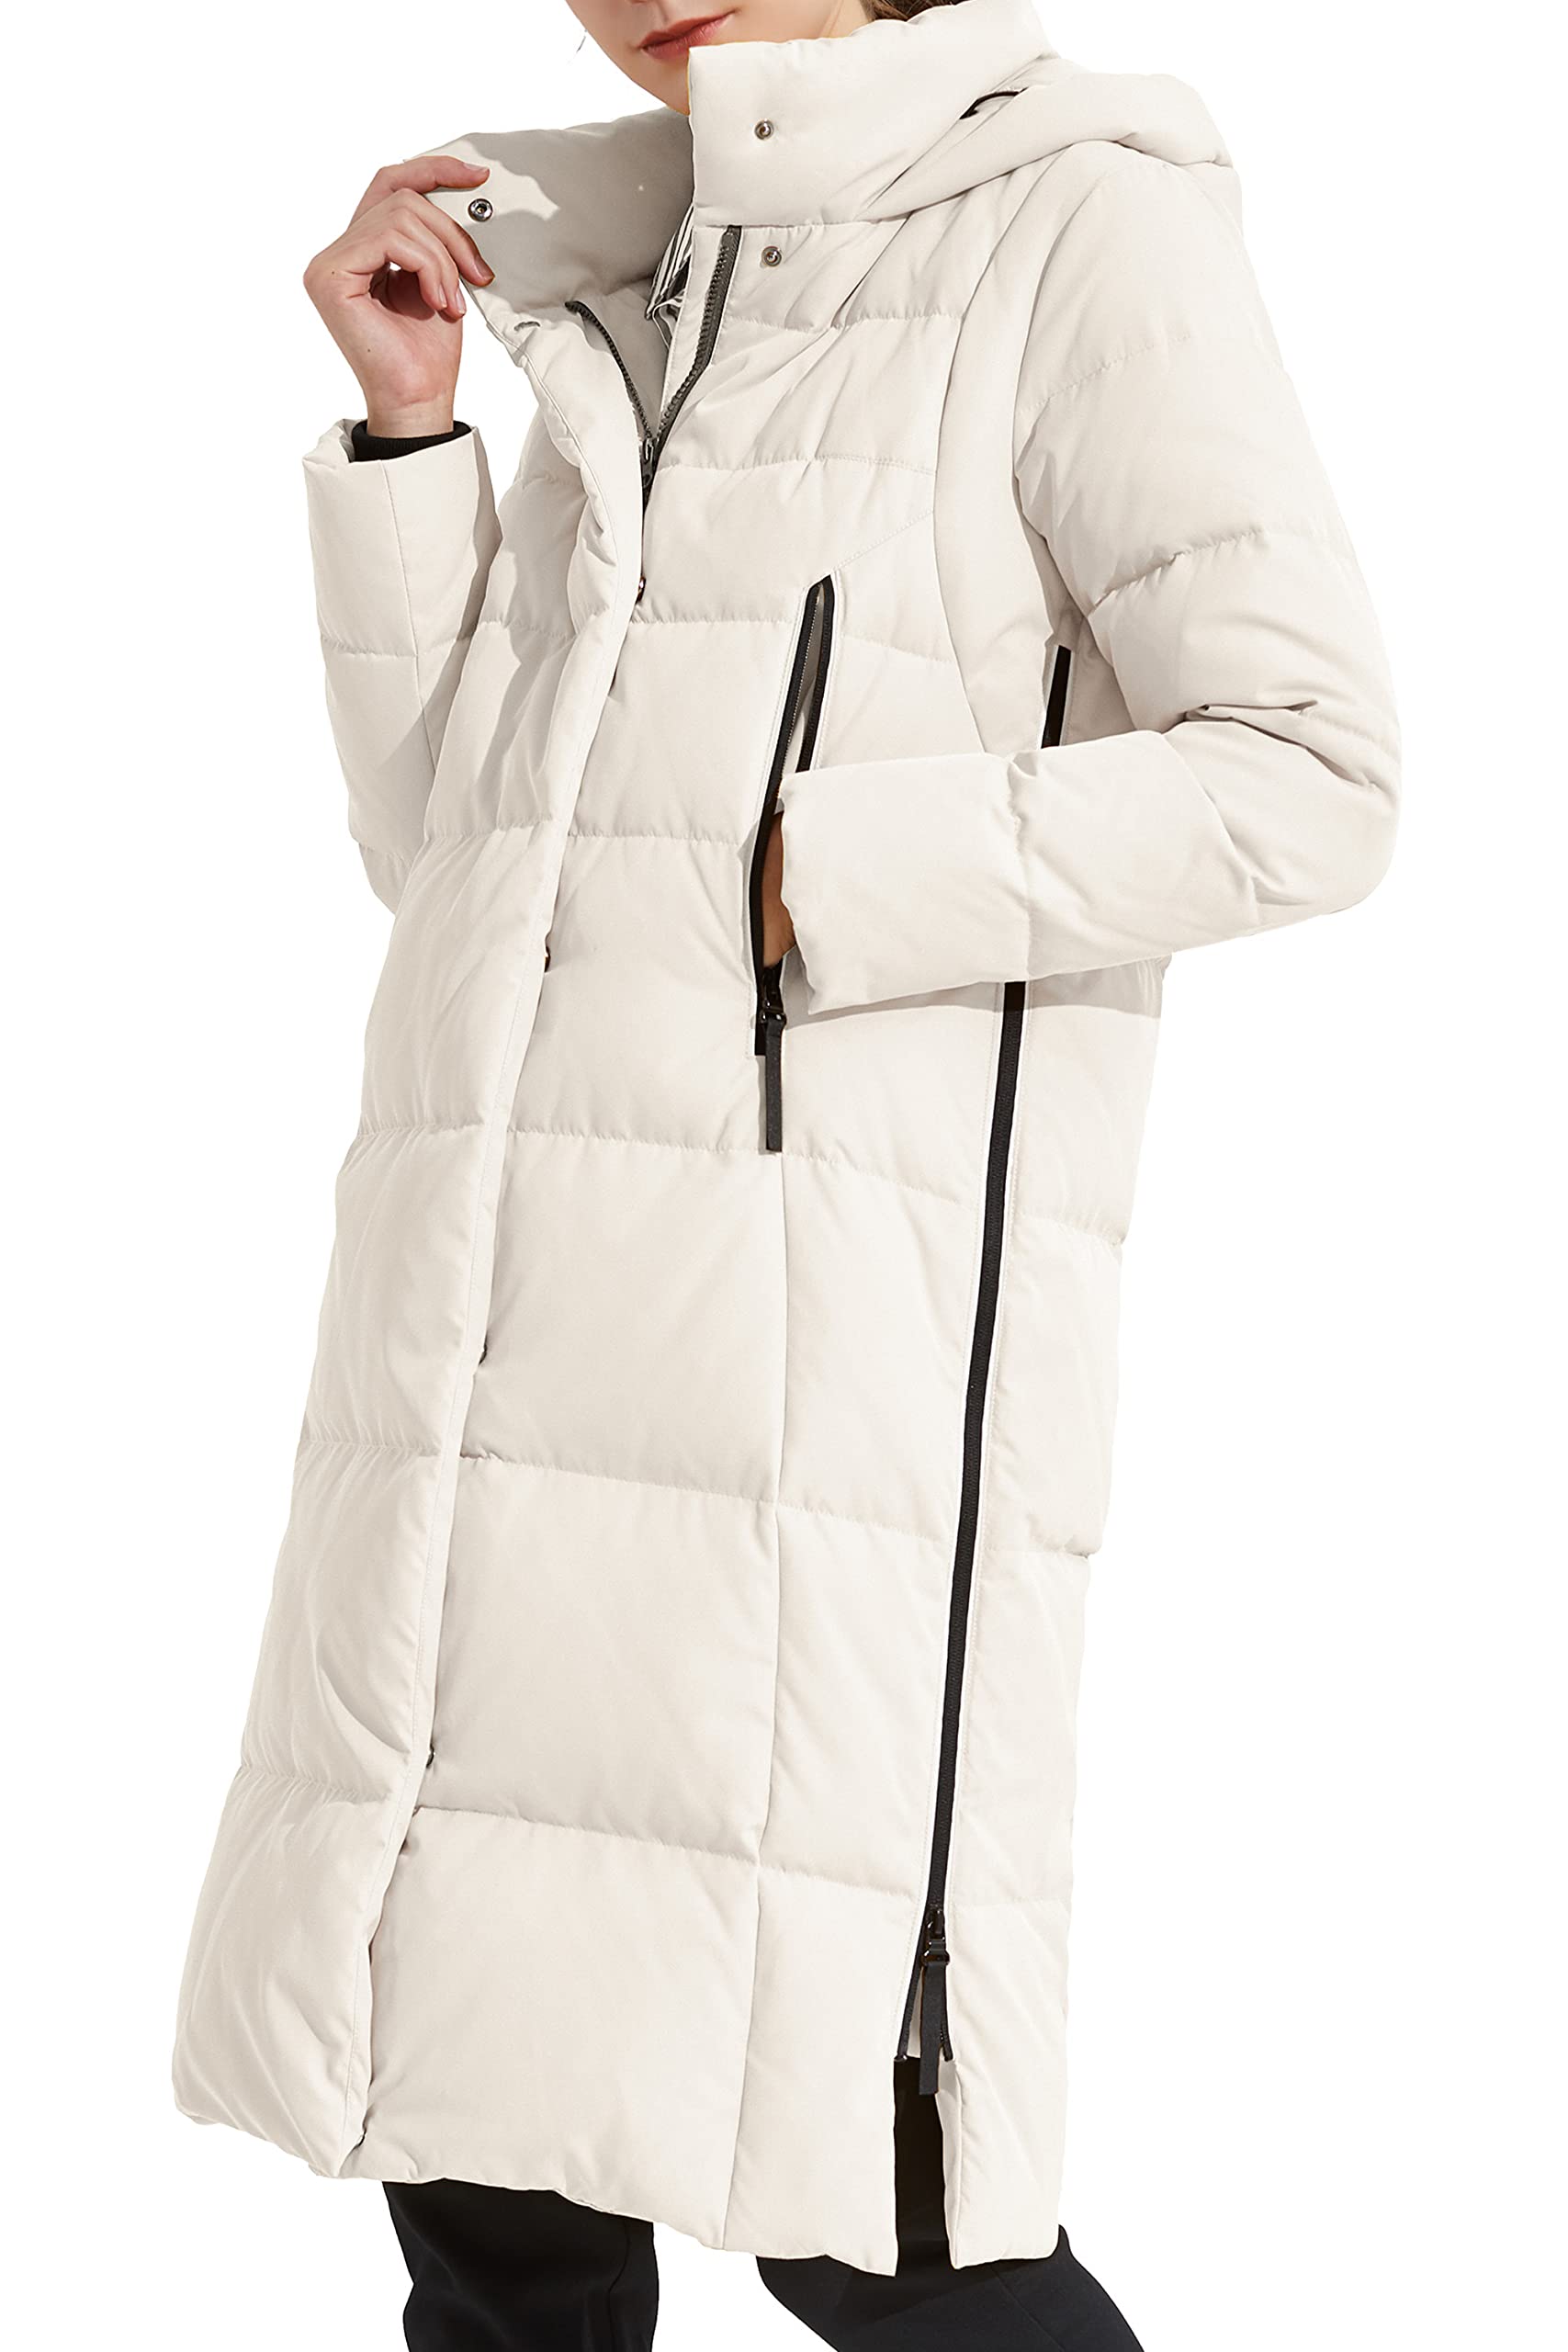 Orolay Women's Thickened Down Jacket Long Winter Coat Hooded Puffer Jacket